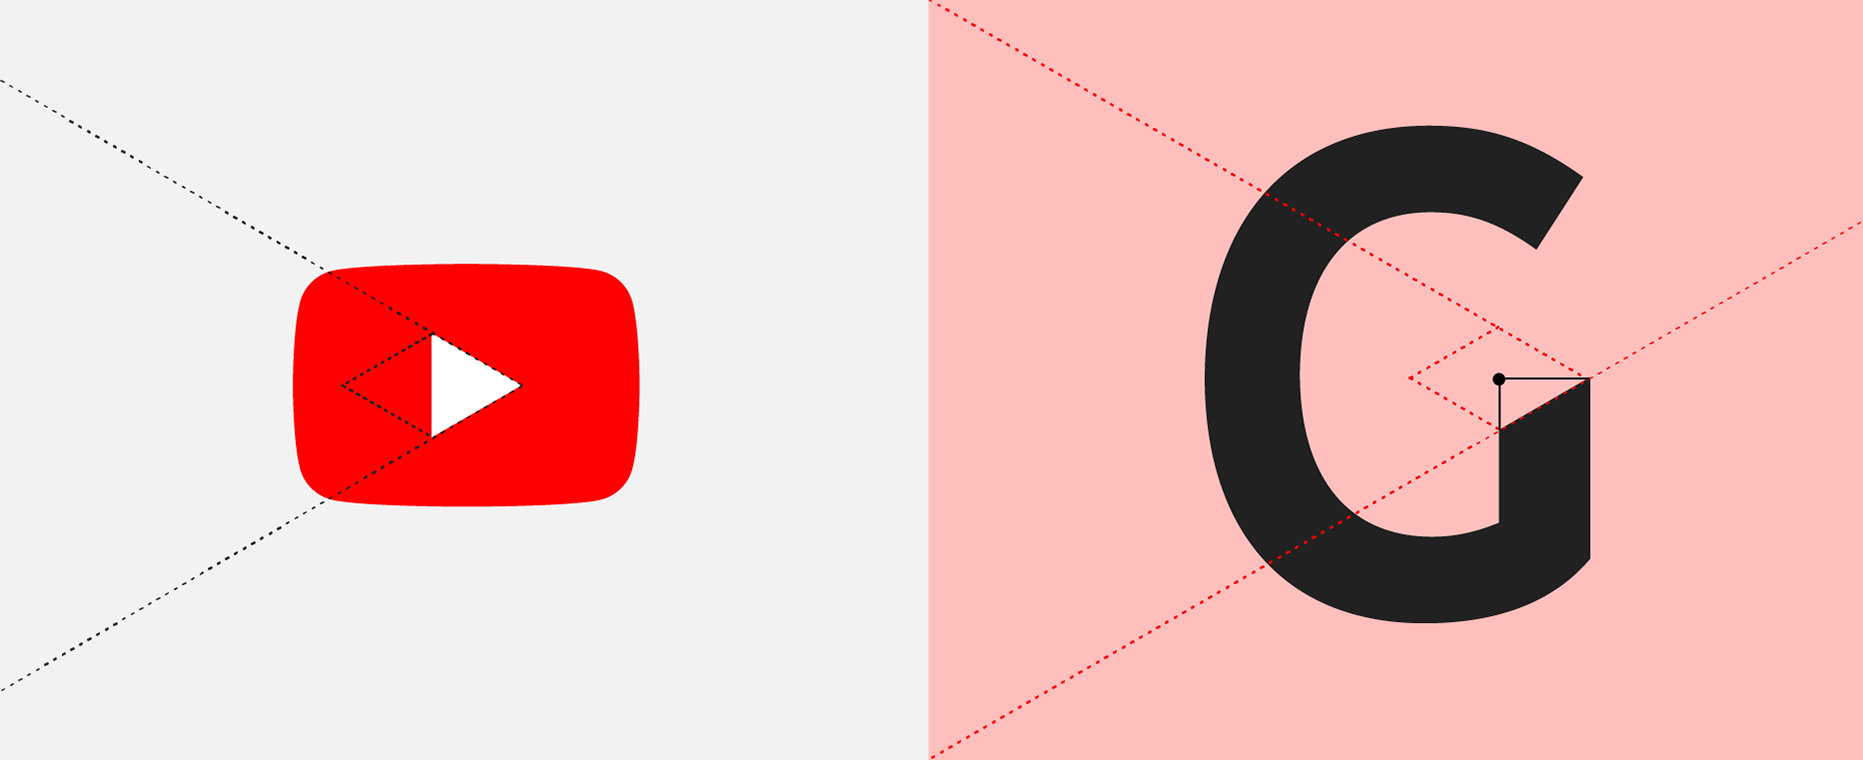 2020 is YouTube Gaming's biggest year, ever: 100B watch time hours - YouTube